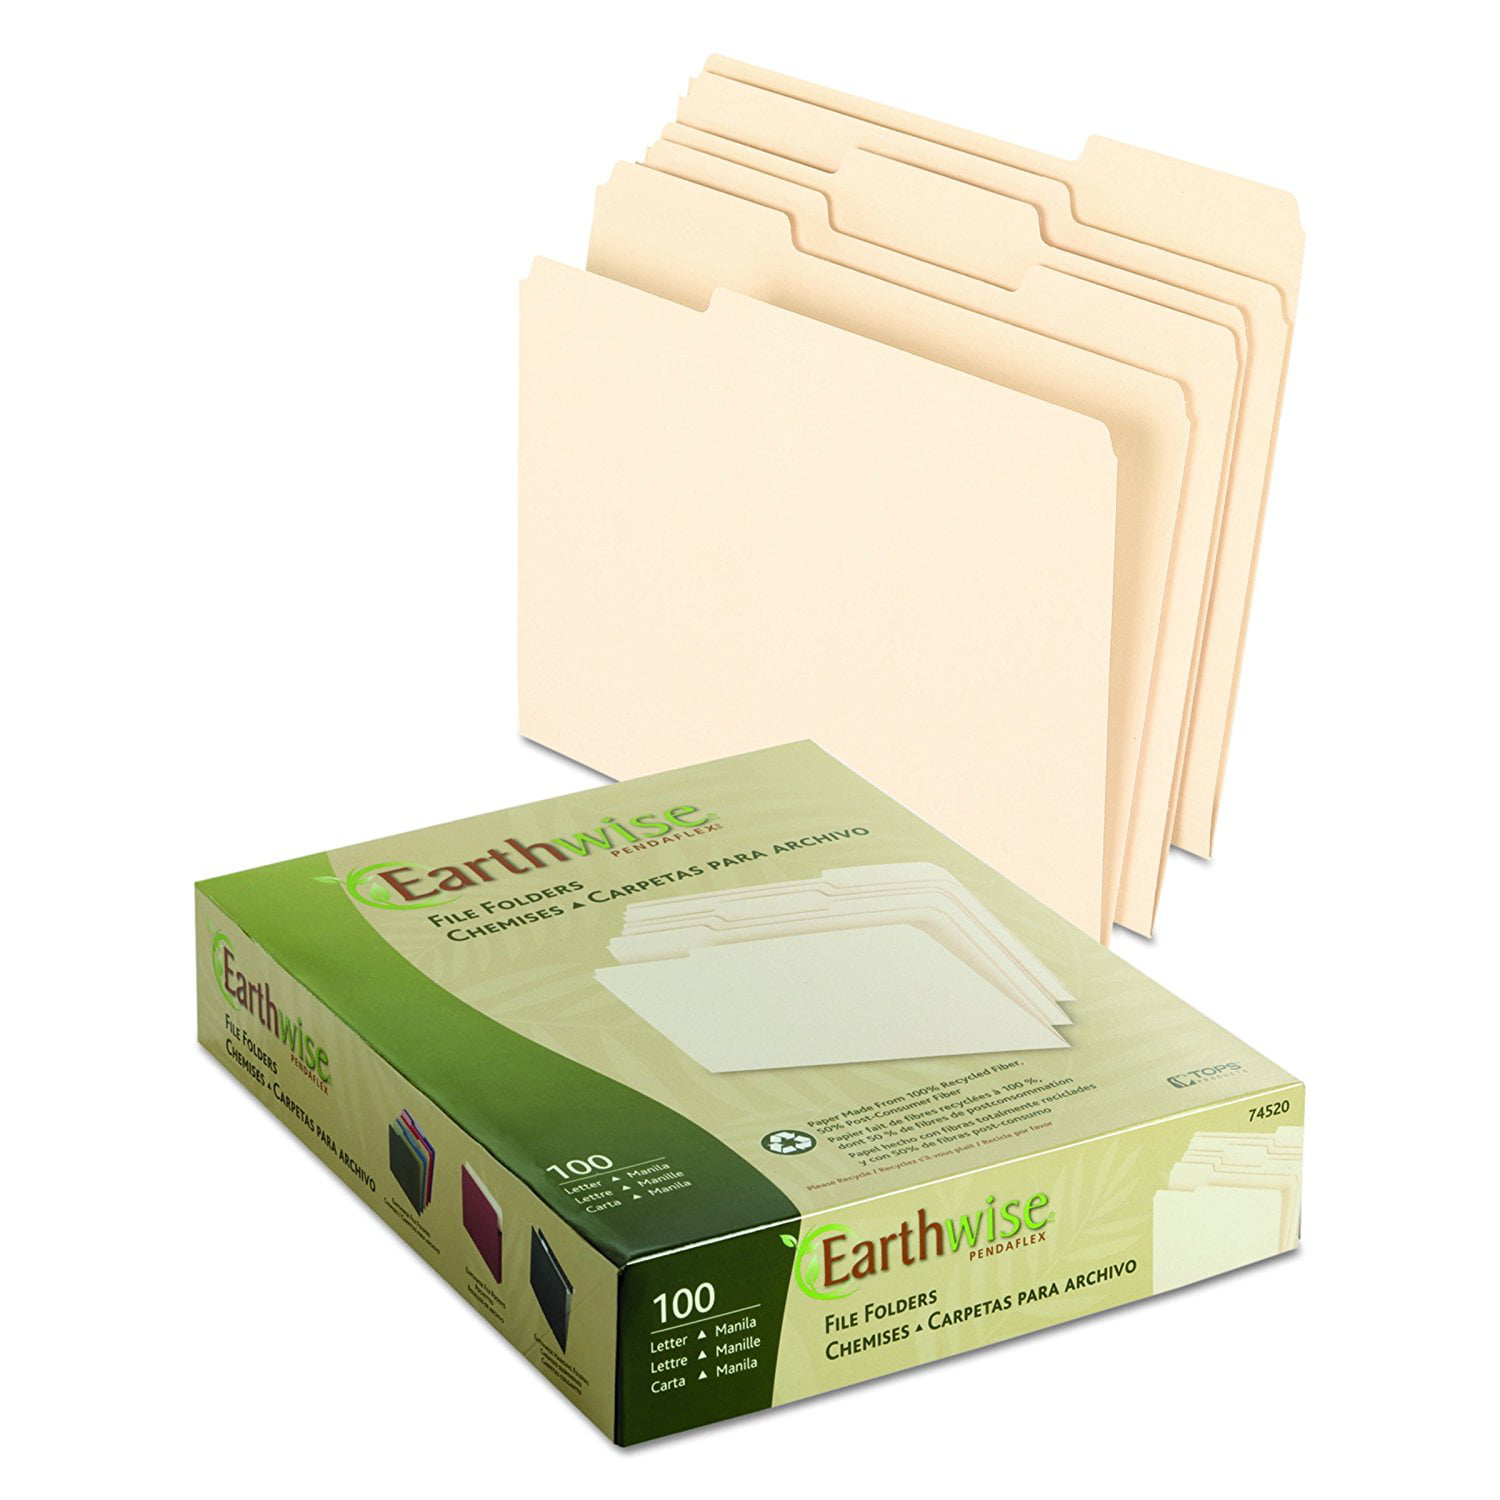 Esselte Earthwise 04342 File Folders Letter Size Third Cut Tabs Natural Made From 100% Recycled Fibers Sold in Packages of 10 